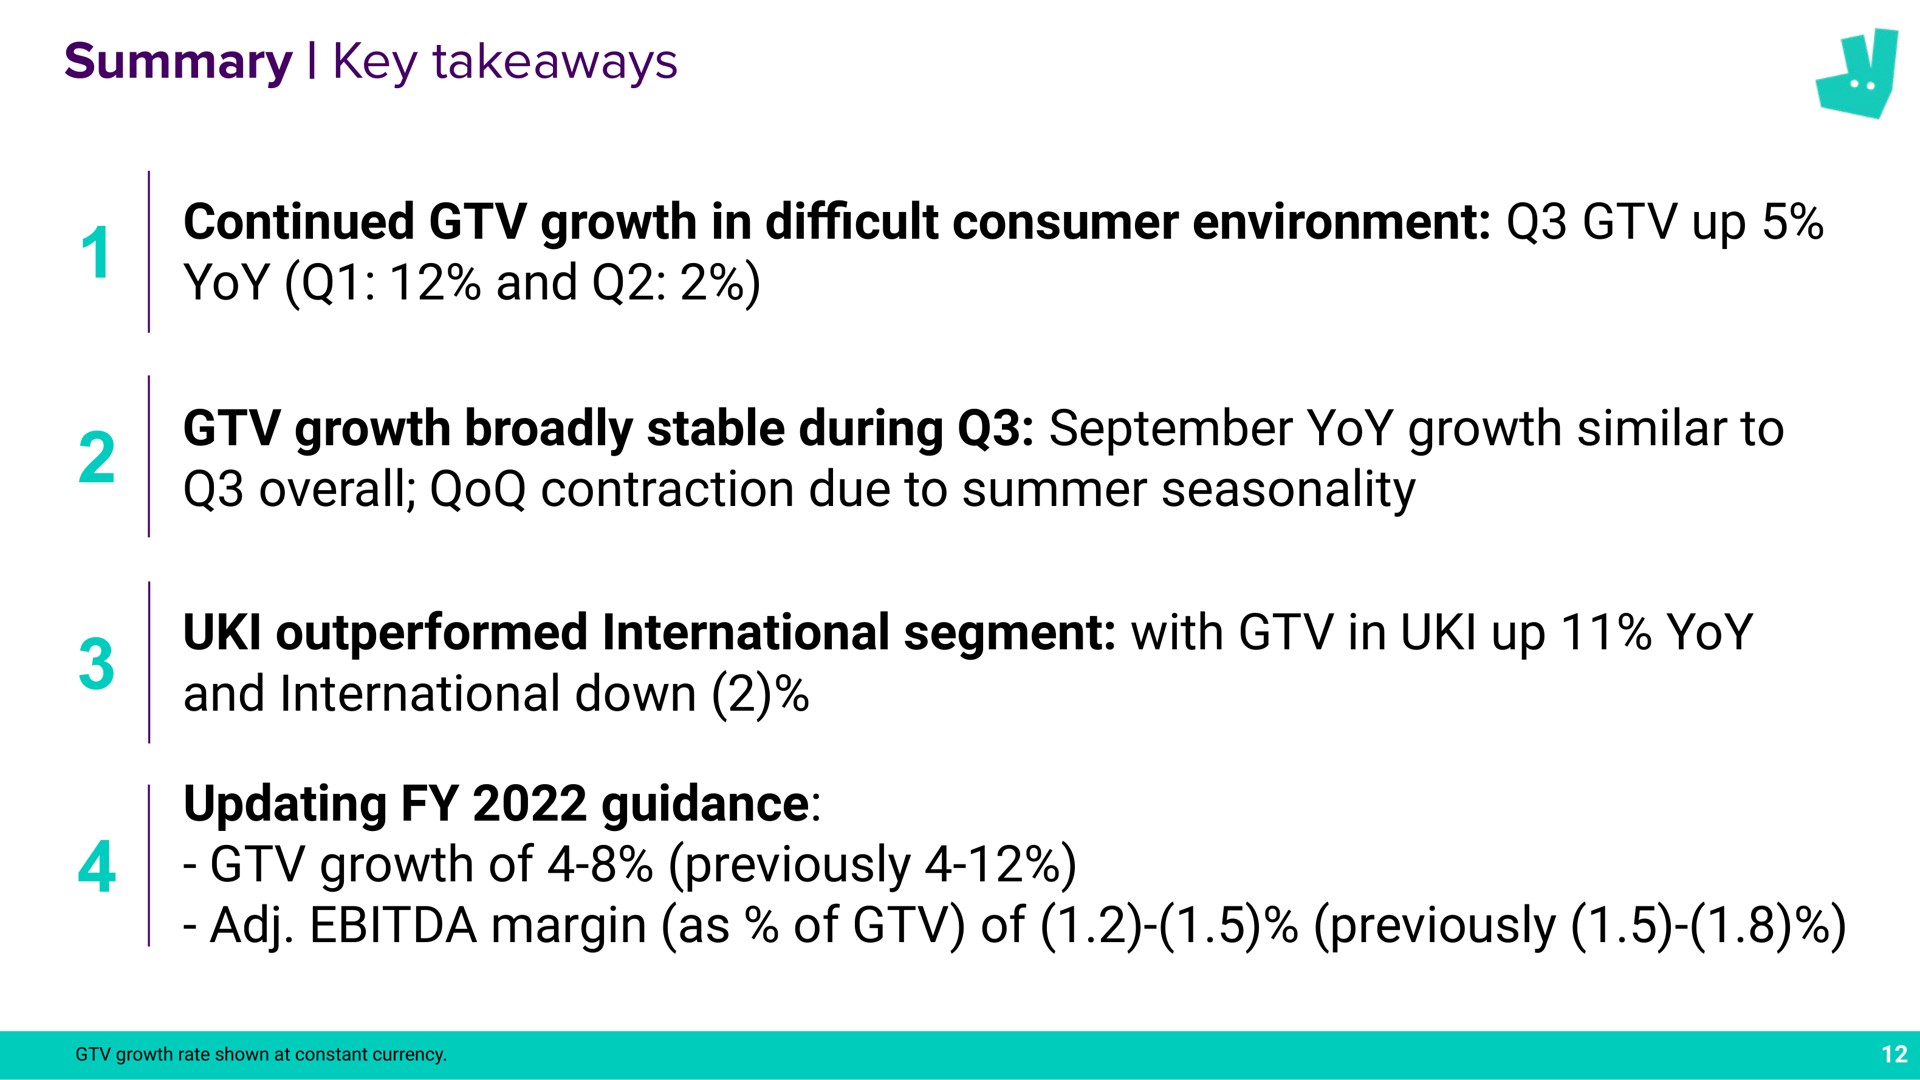 summary key continued growth in cult consumer environment up yoy and growth broadly stable during yoy growth similar to overall contraction due to summer seasonality outperformed international segment with in up yoy and international down updating guidance growth of previously margin as of of previously a difficult | Deliveroo